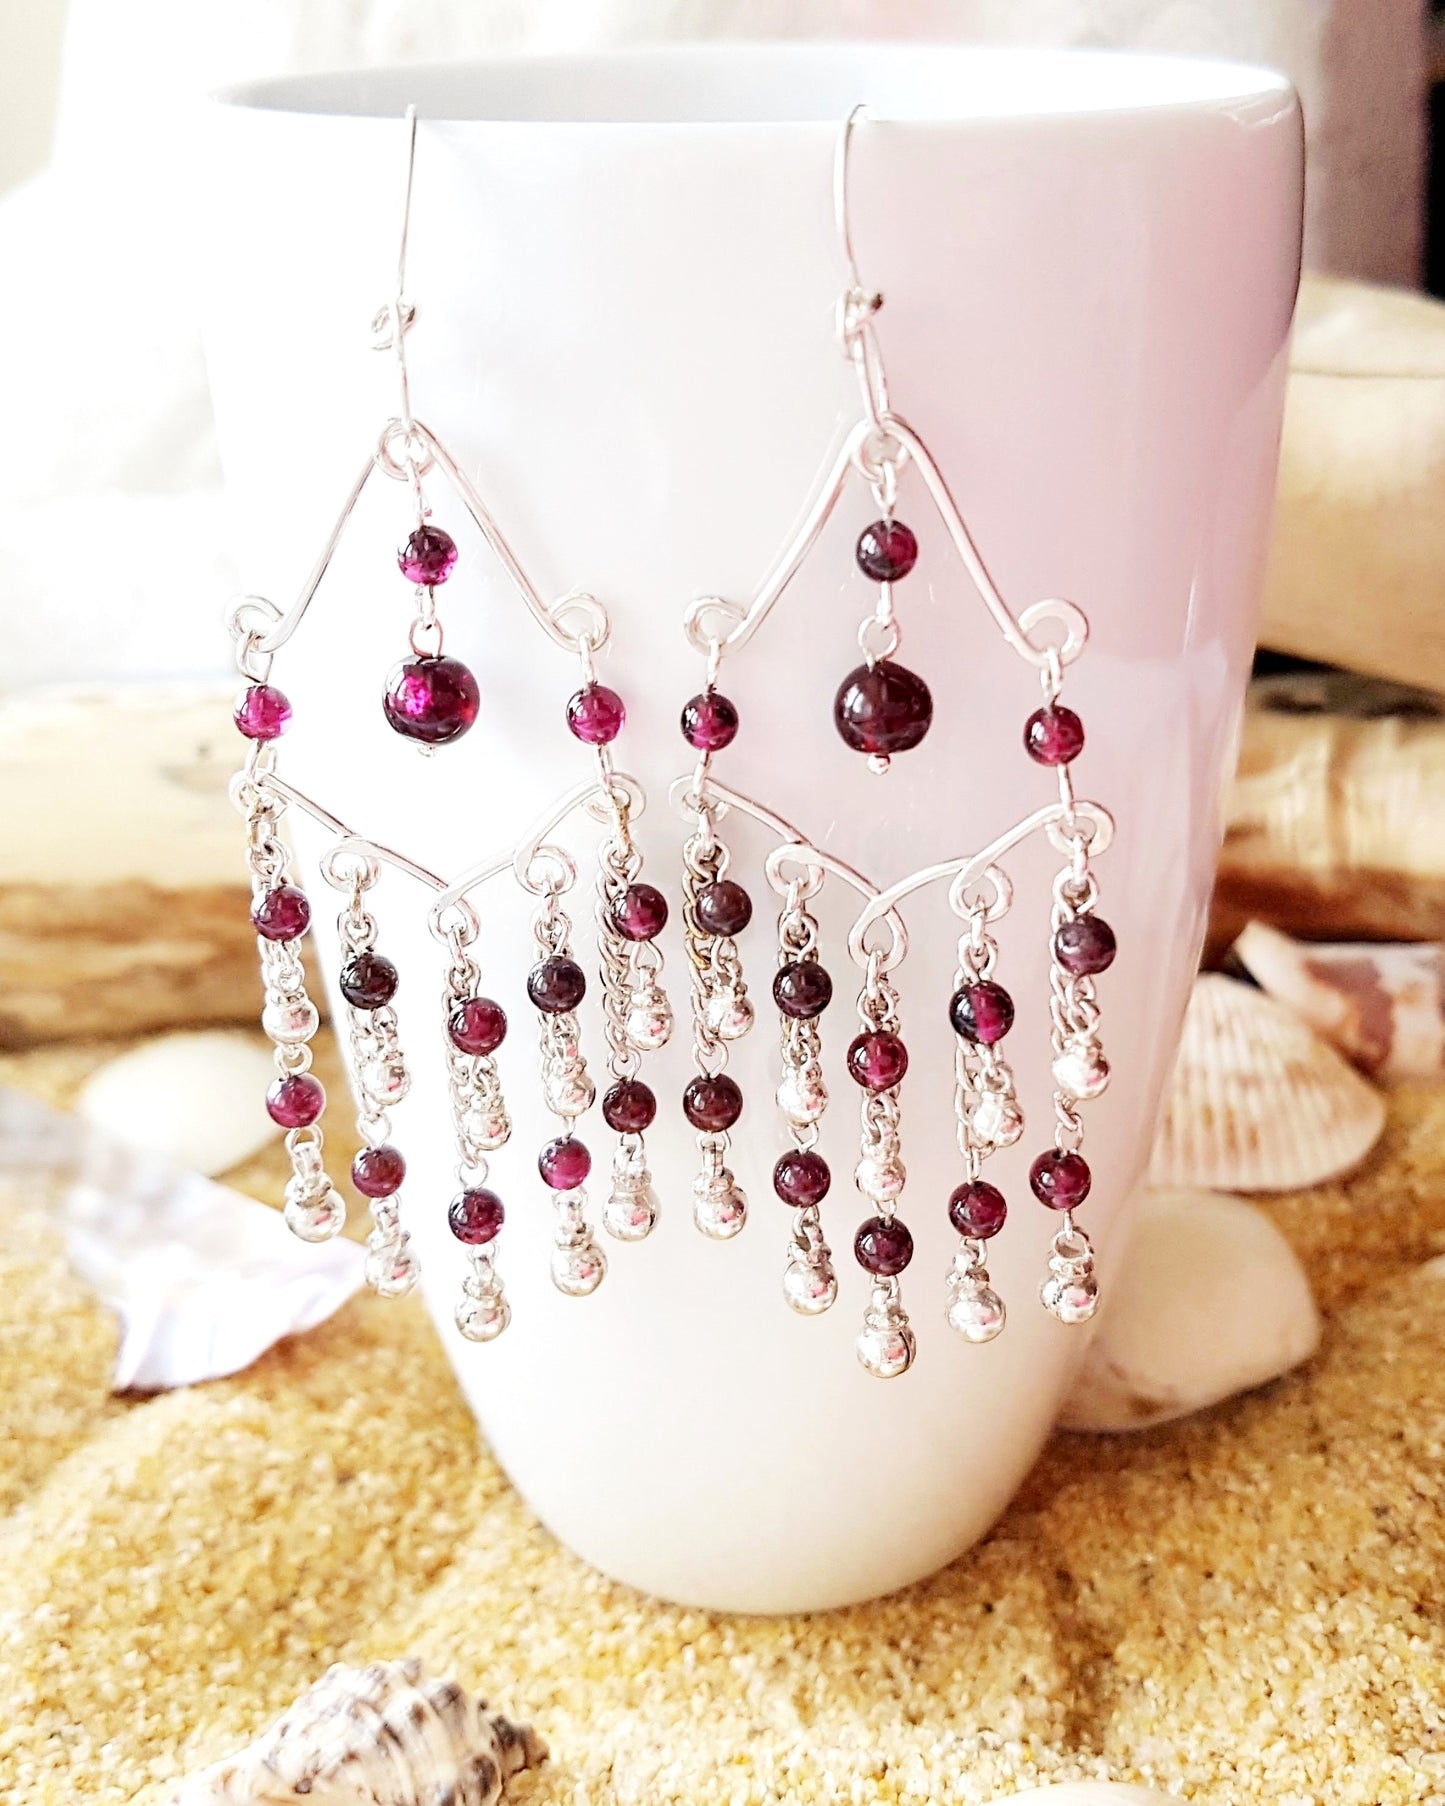   Long, Elaborate Garnet Chandelier Earrings made with Upcycled Vintage Sterling Silver and new.